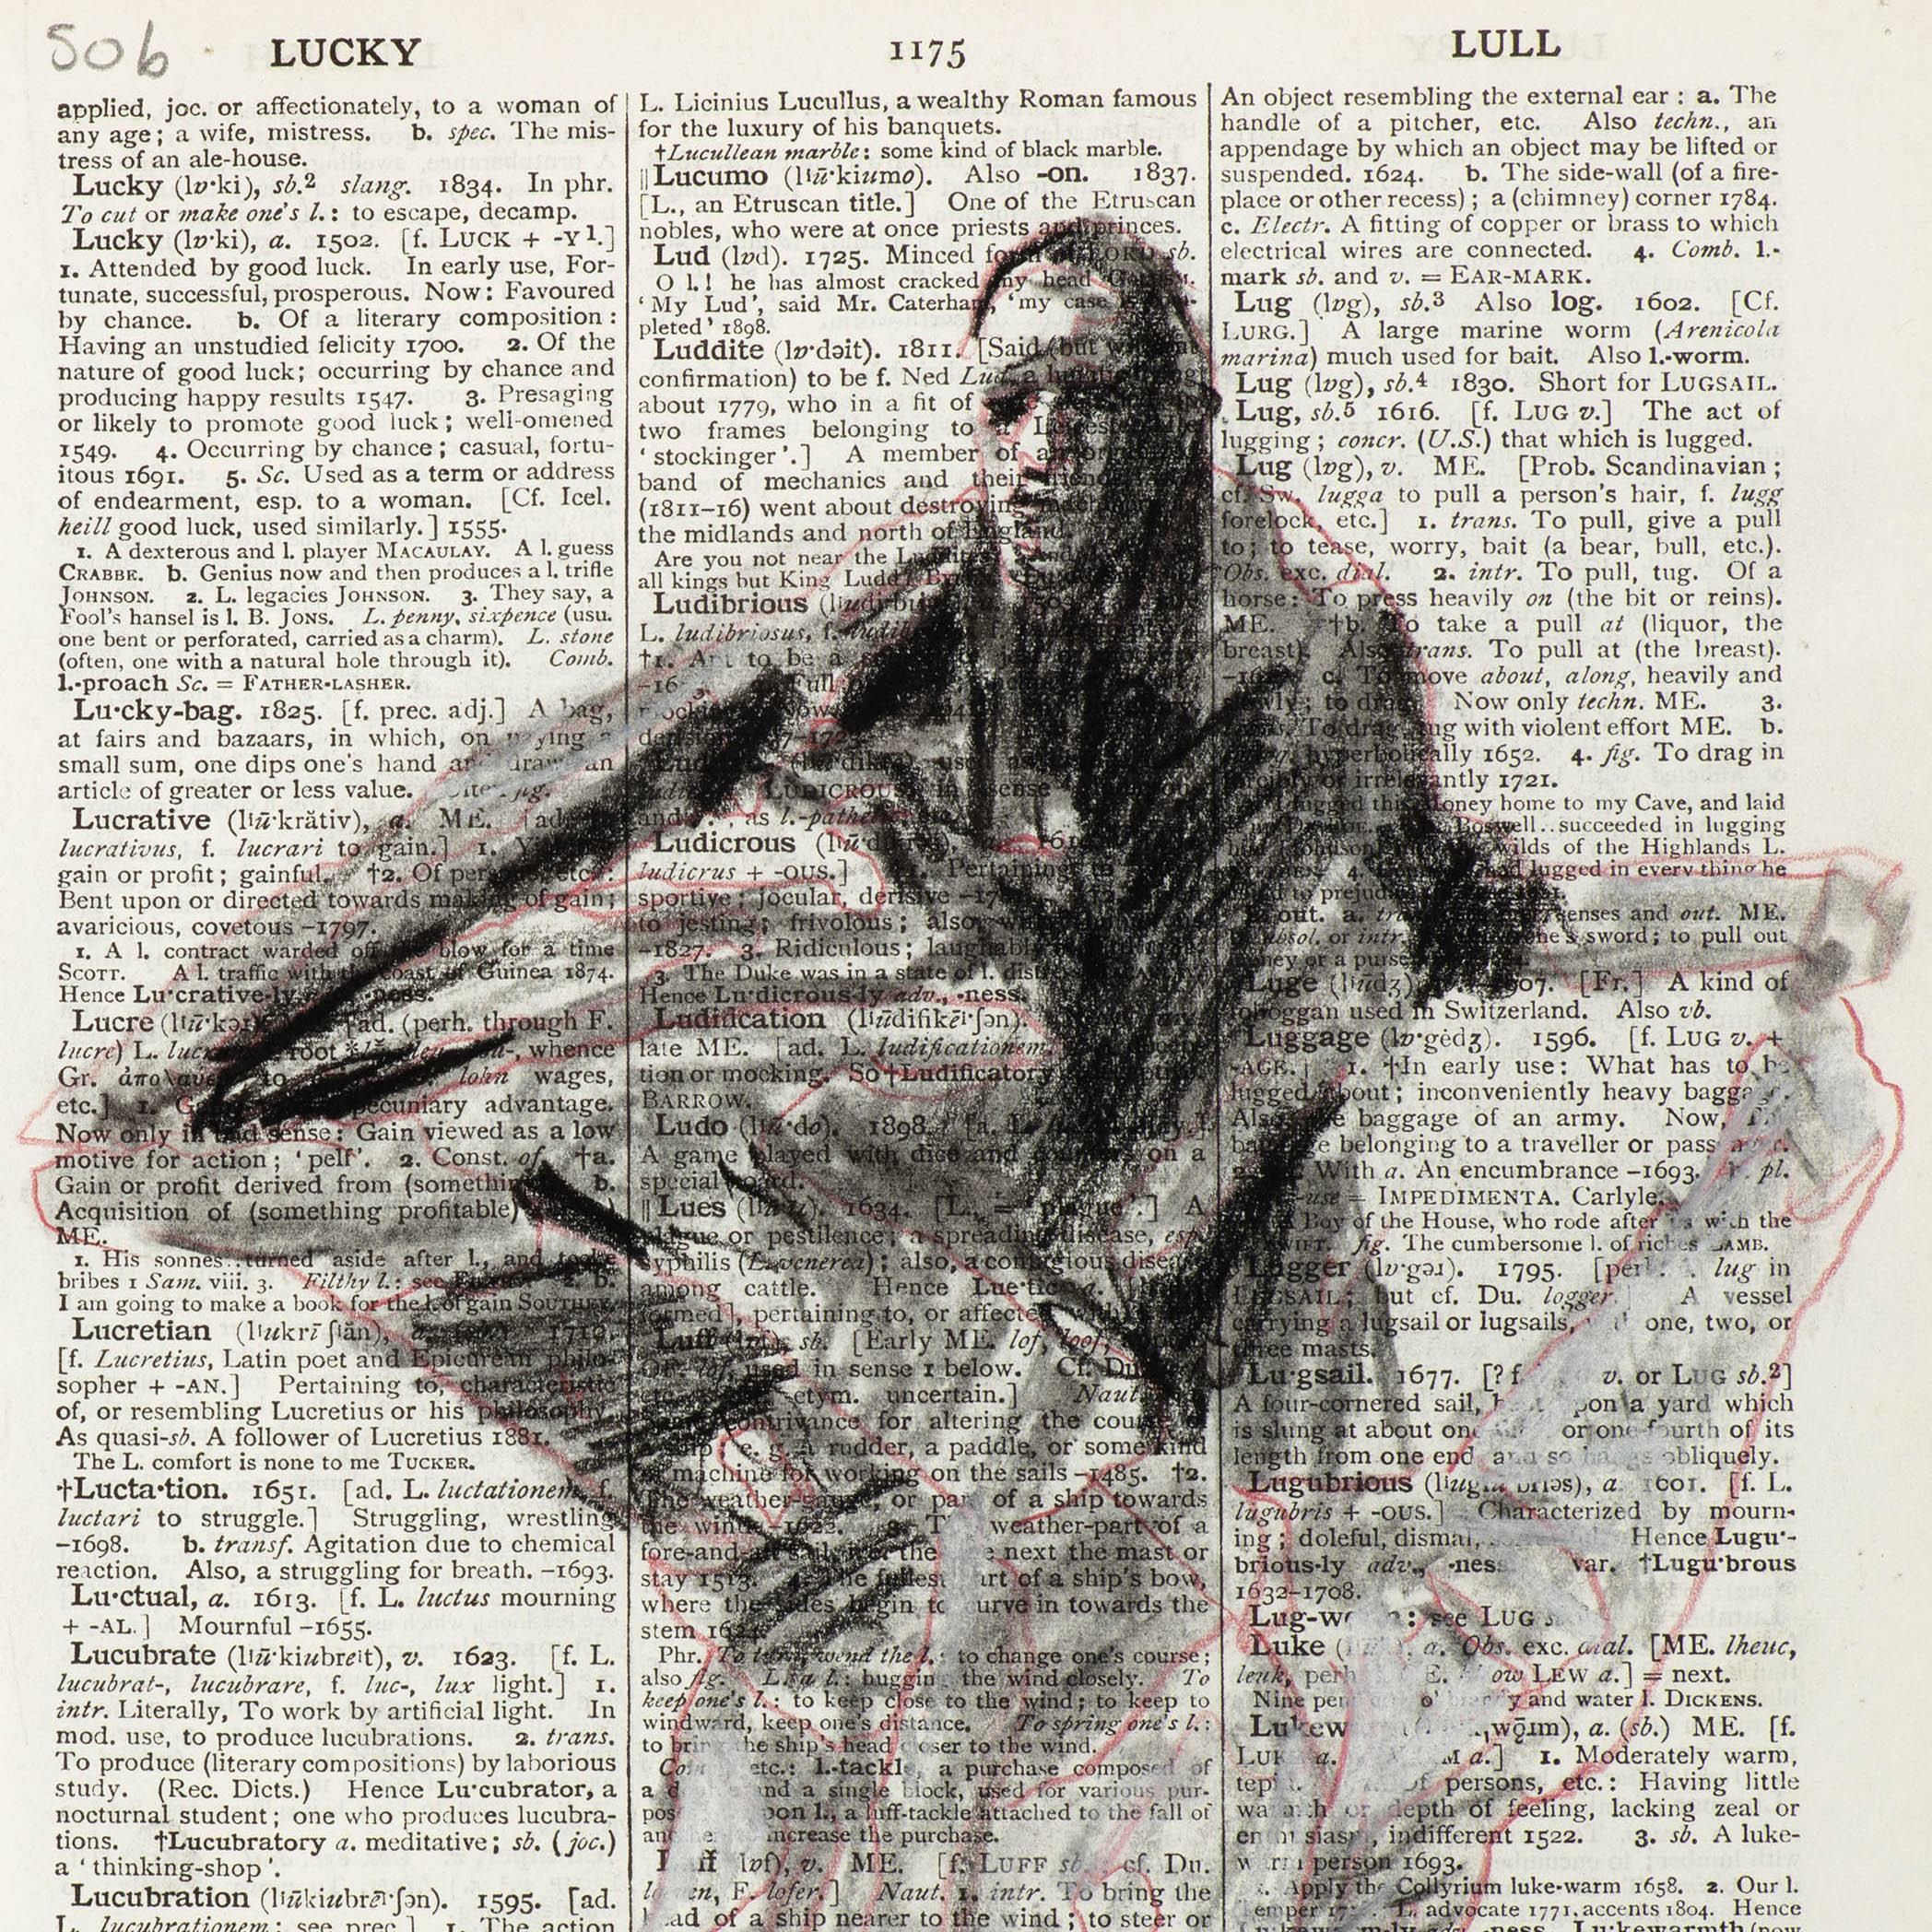 William Kentridge: Day Will Break More Than Once